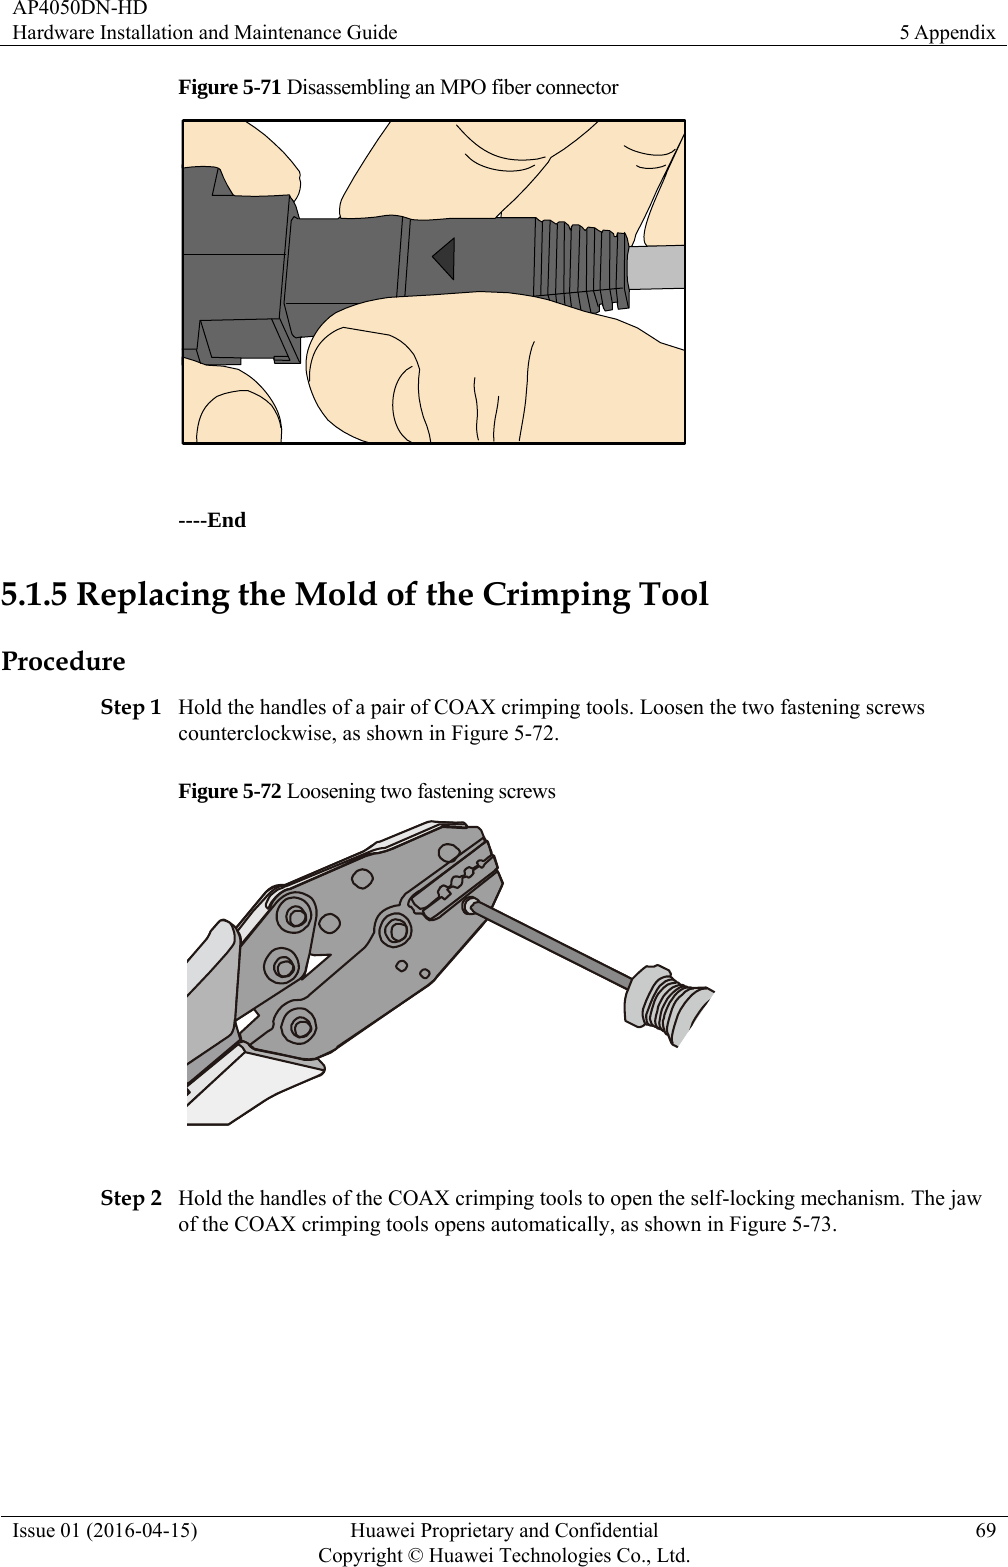 AP4050DN-HD Hardware Installation and Maintenance Guide  5 Appendix Issue 01 (2016-04-15)  Huawei Proprietary and Confidential         Copyright © Huawei Technologies Co., Ltd.69 Figure 5-71 Disassembling an MPO fiber connector   ----End 5.1.5 Replacing the Mold of the Crimping Tool Procedure Step 1 Hold the handles of a pair of COAX crimping tools. Loosen the two fastening screws counterclockwise, as shown in Figure 5-72. Figure 5-72 Loosening two fastening screws   Step 2 Hold the handles of the COAX crimping tools to open the self-locking mechanism. The jaw of the COAX crimping tools opens automatically, as shown in Figure 5-73. 